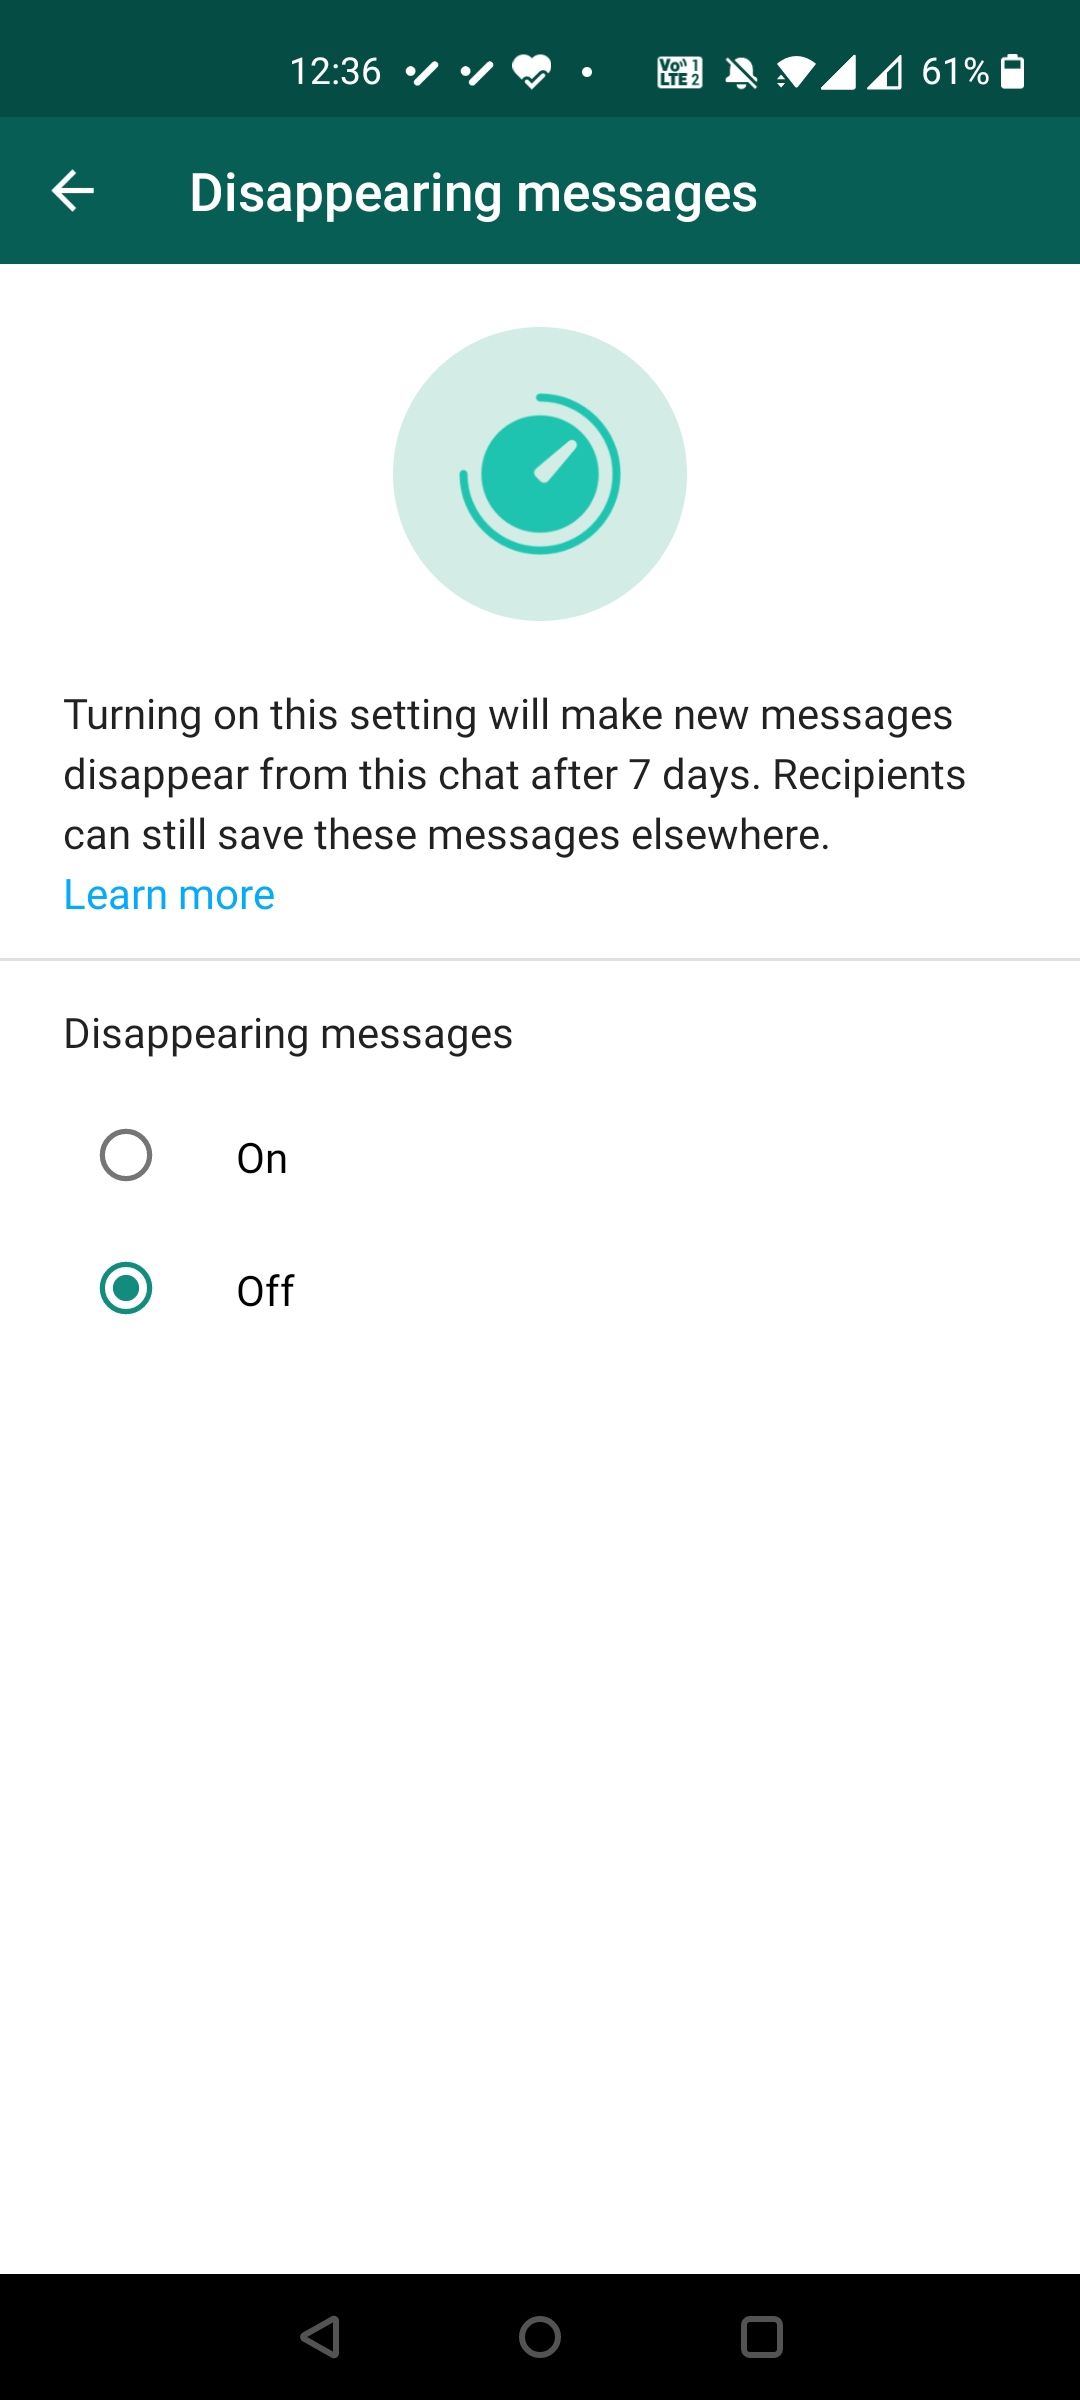 Enable disappearing messages in WhatsApp